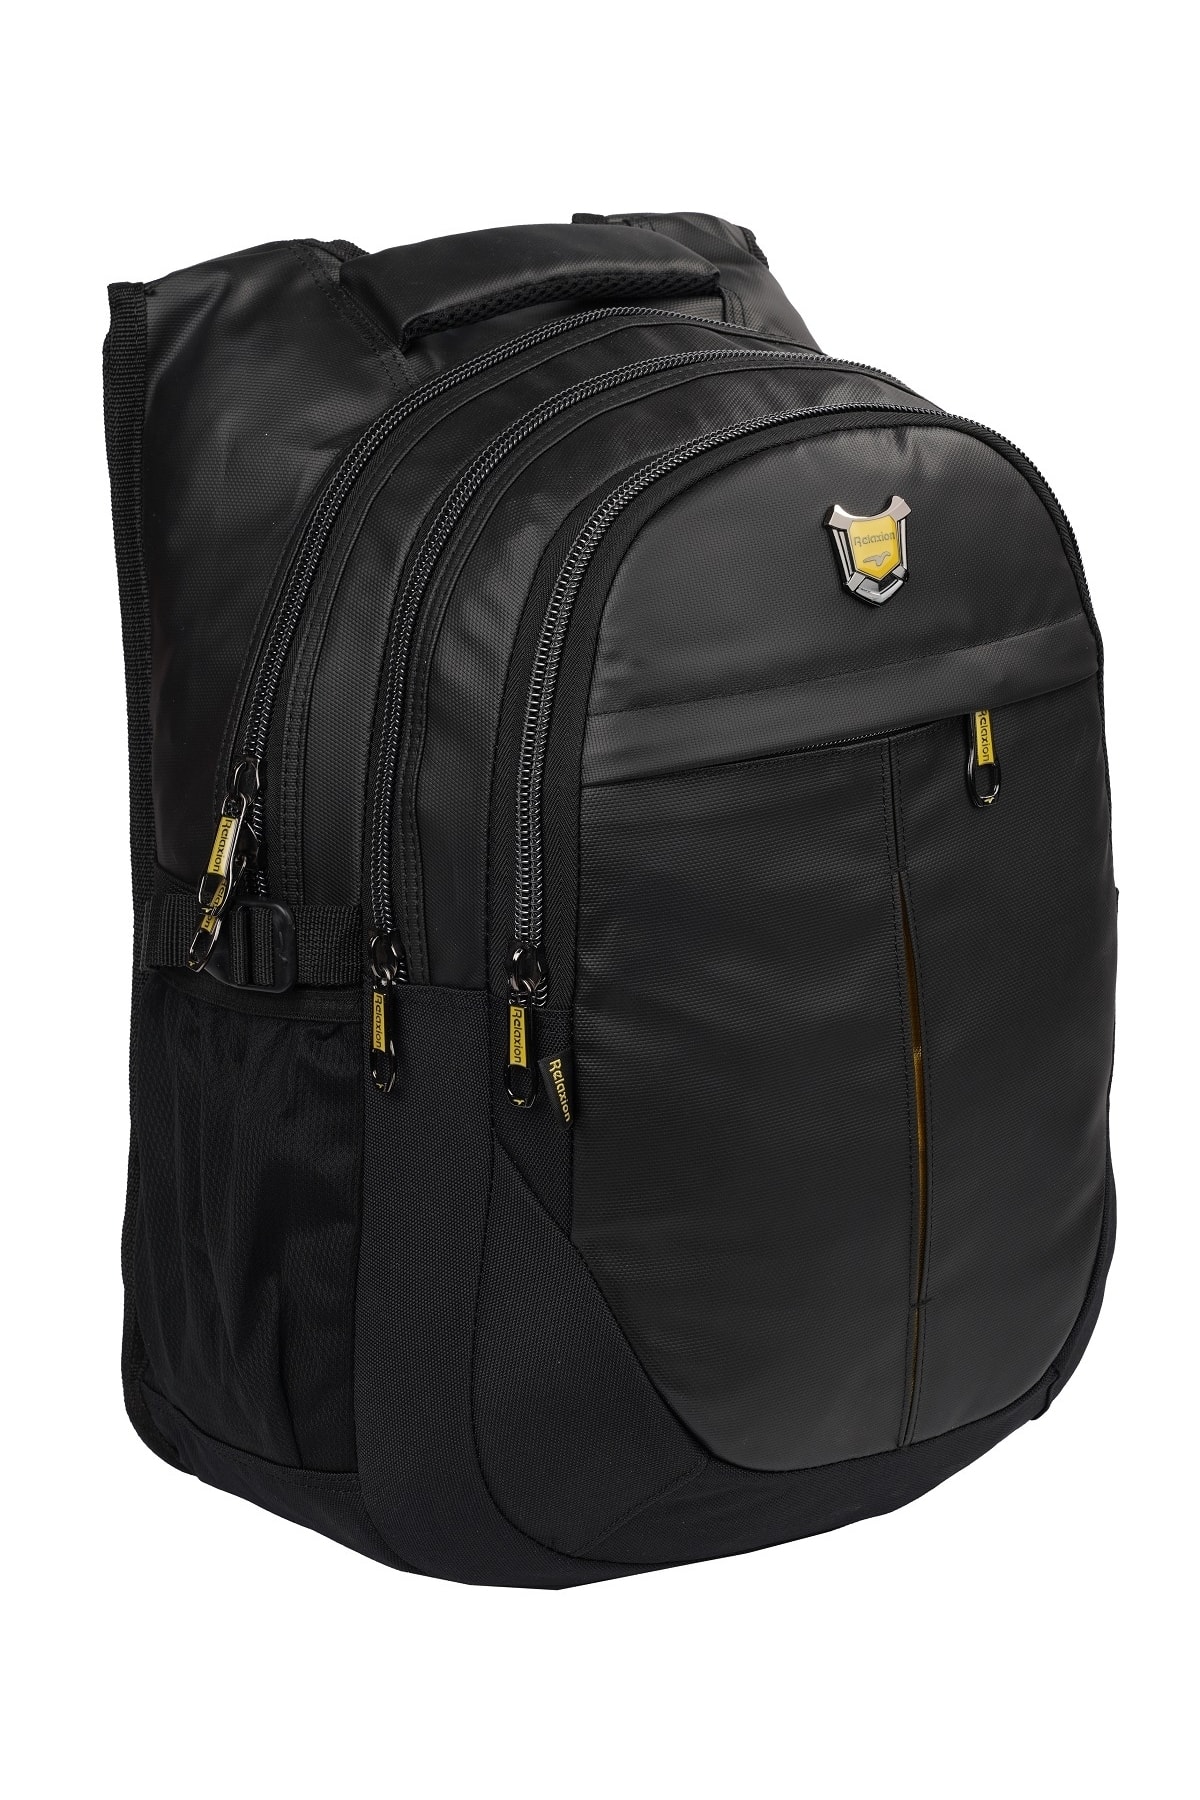 Liviya Bags Backpacks - Get Best Price from Manufacturers & Suppliers in  India-gemektower.com.vn